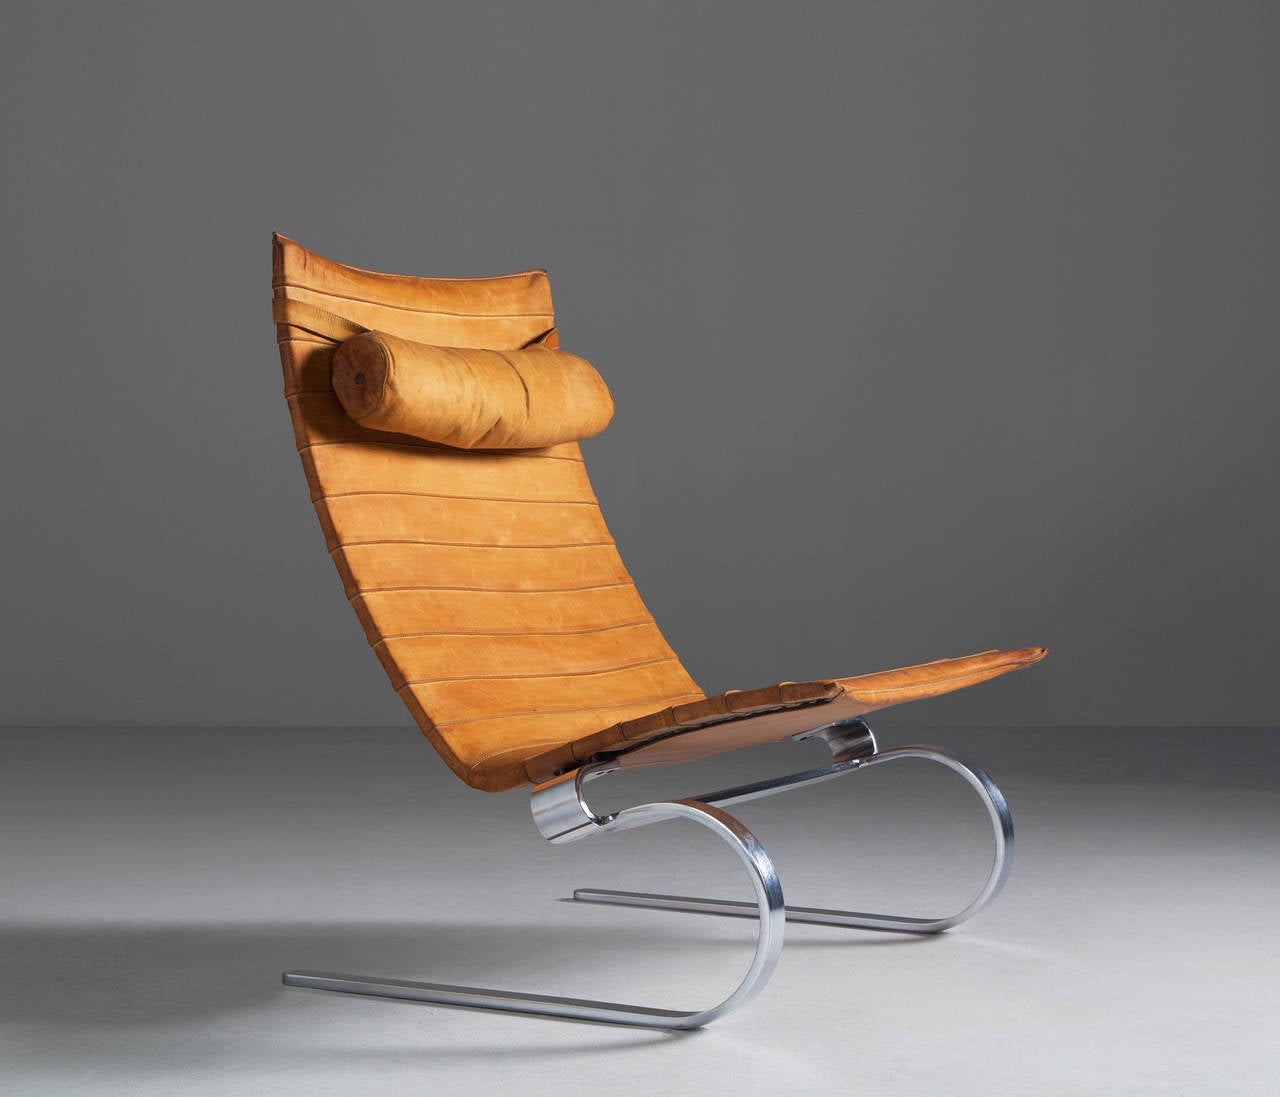 Easy chair PK 20 designed by Poul Kjaerholm for E. Kold Christensen, 1967.
This eye-catching chair is made of matte, chrome-plated spring steel and upholstered in stunning original naturel leather.

The leather is overall very well preserved and